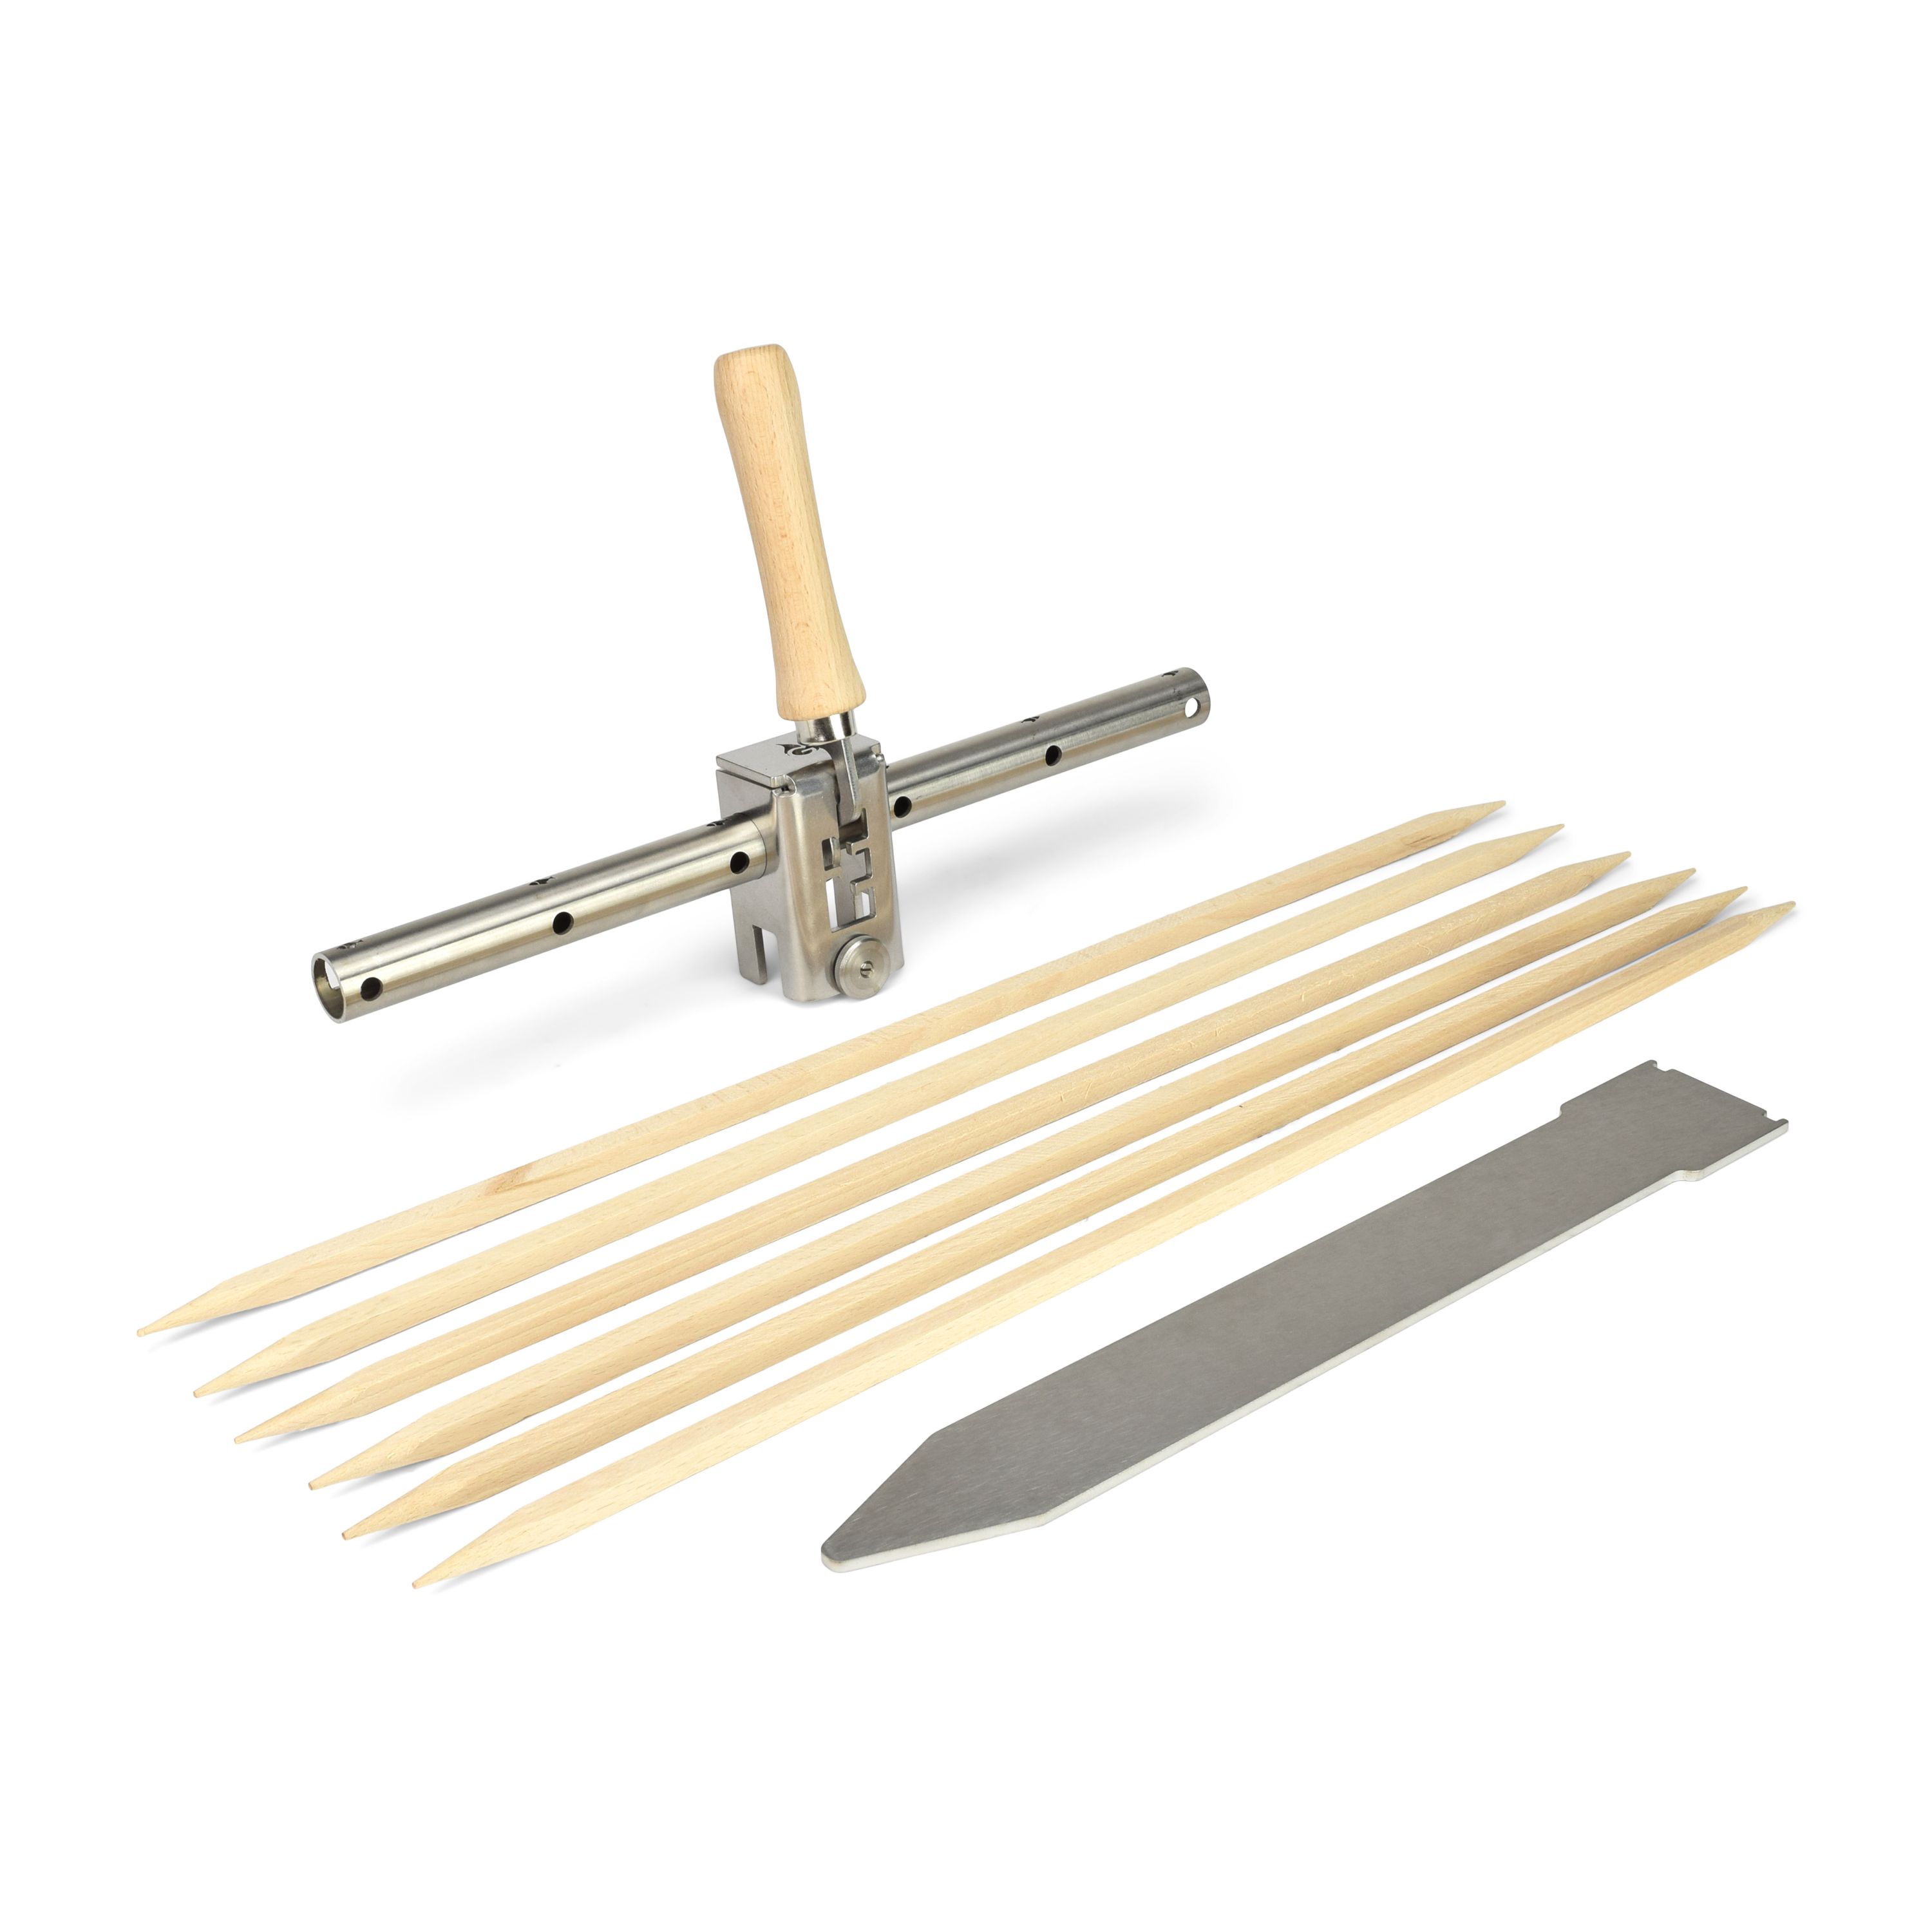 Asado holder for many extensions Basic model with wooden skewers